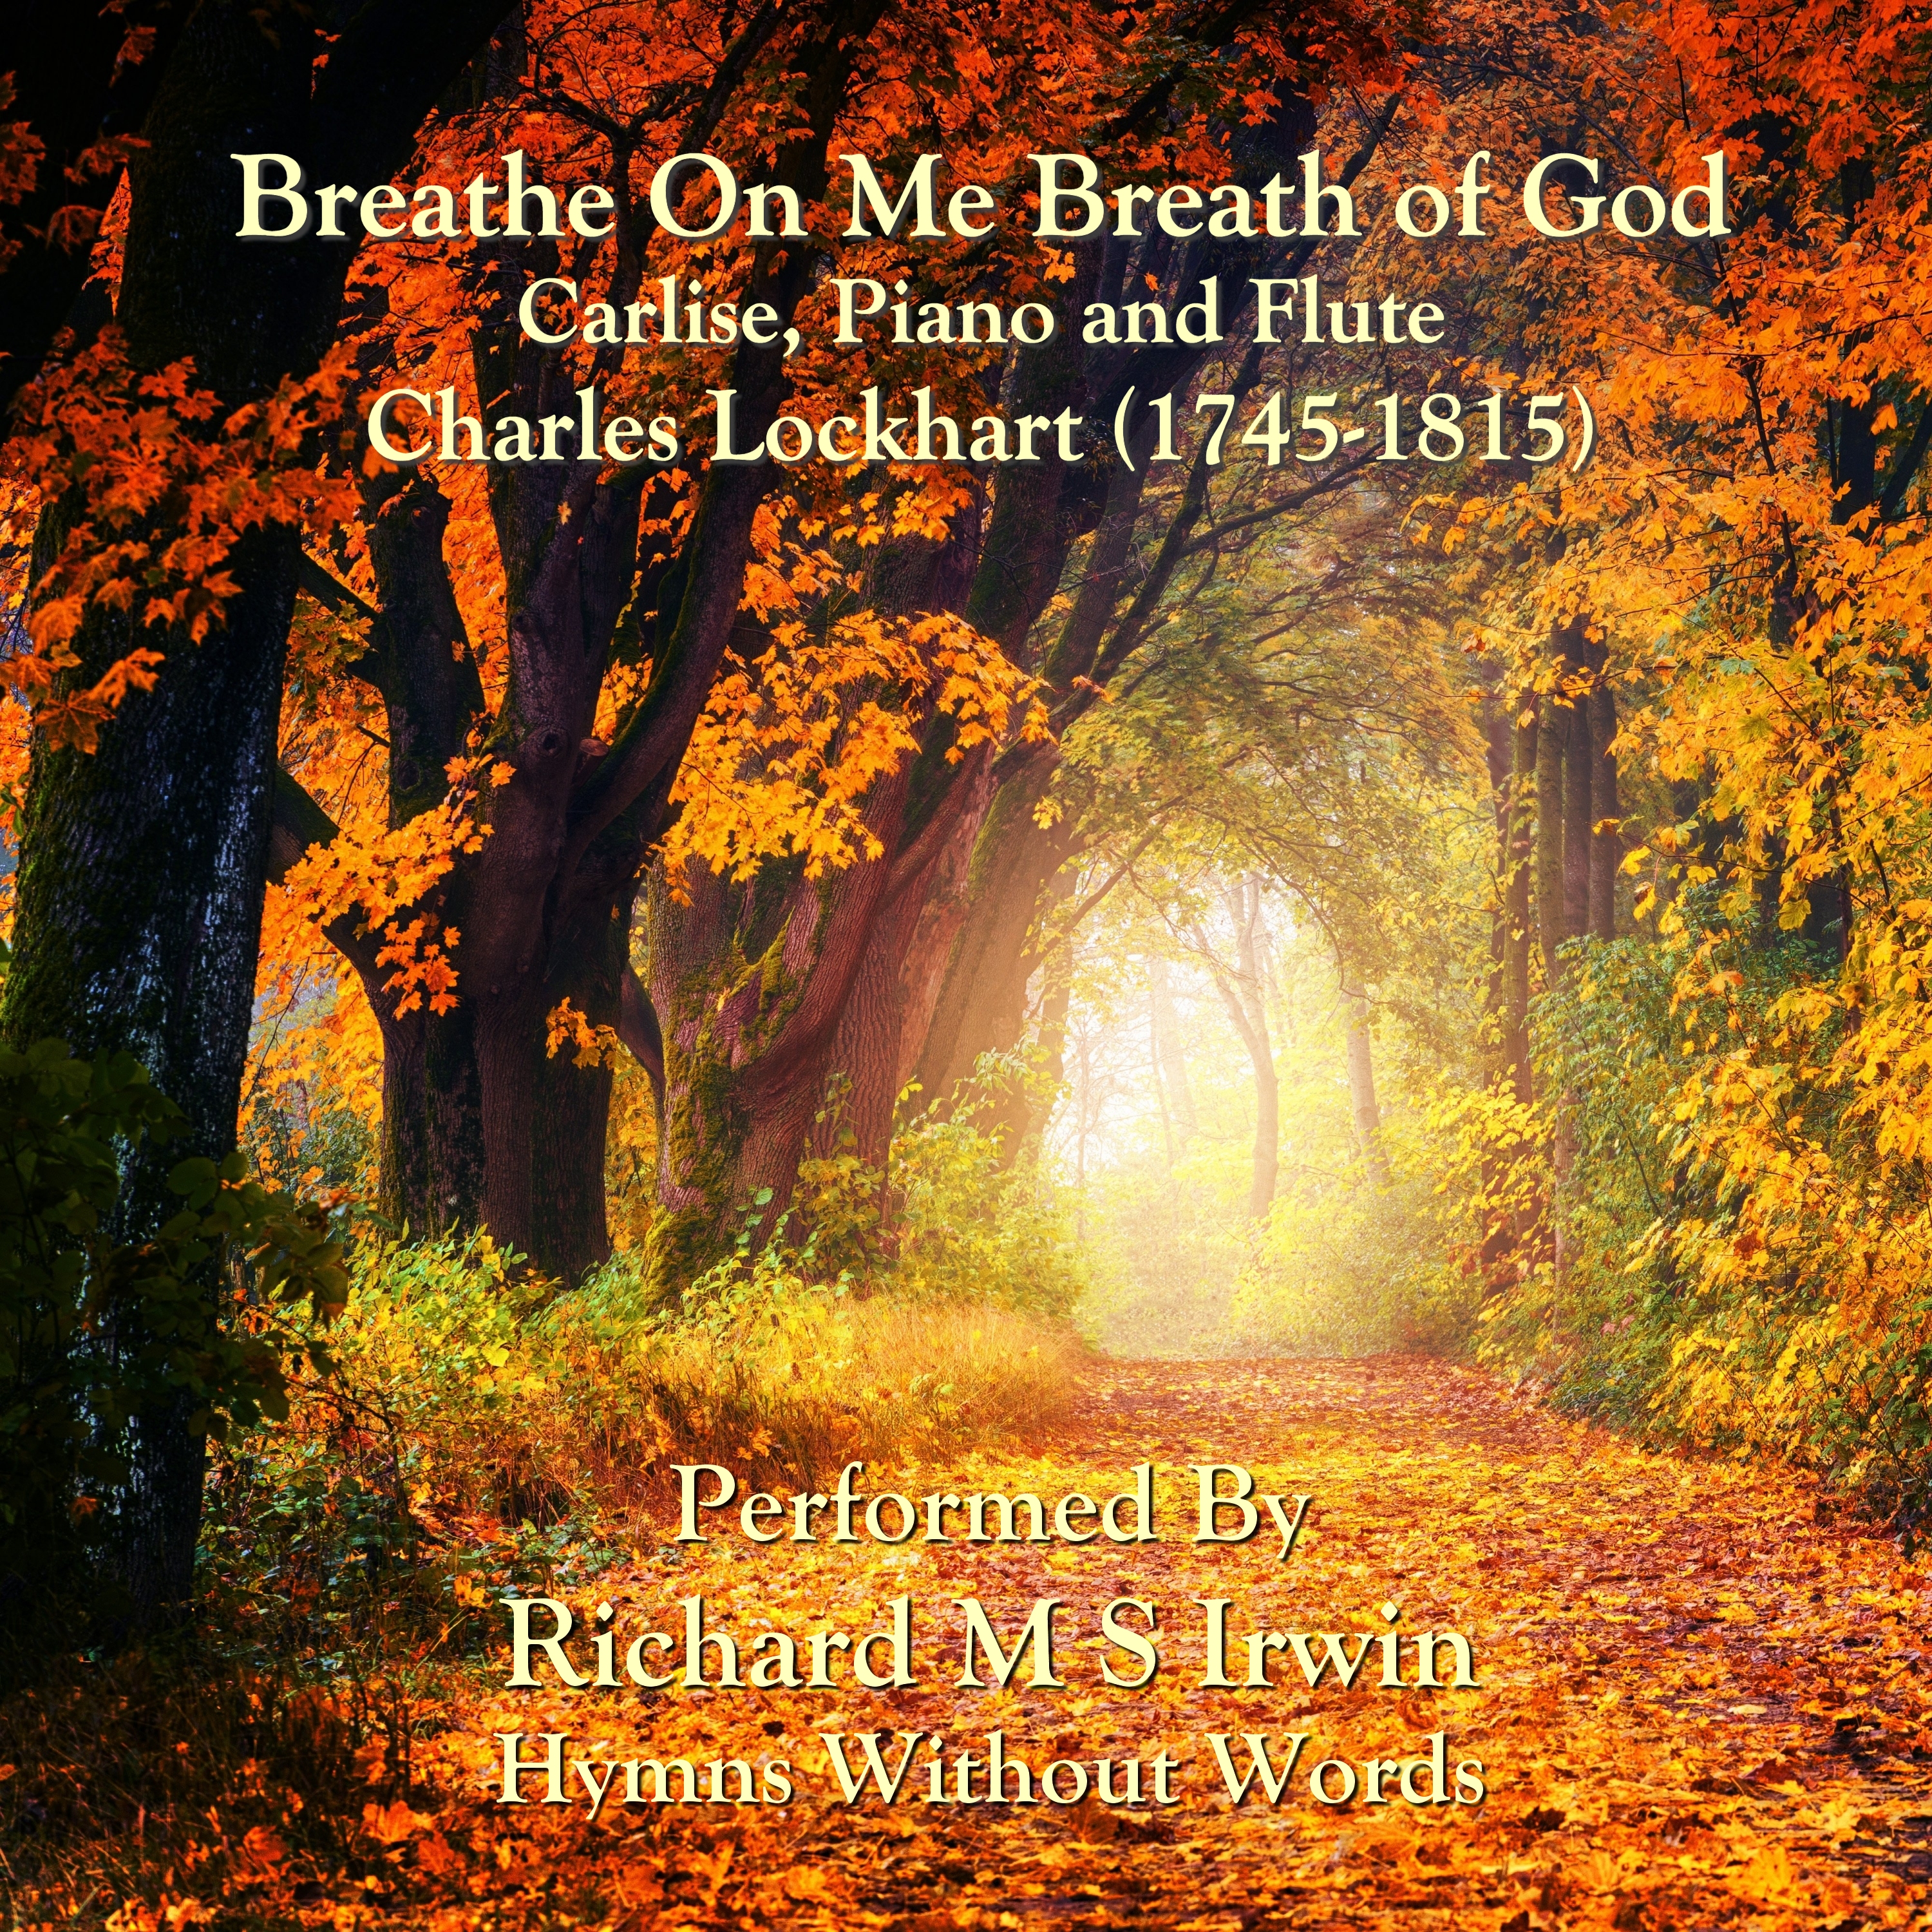 Breathe On Me Breath Of God Carlise, Piano And Flute